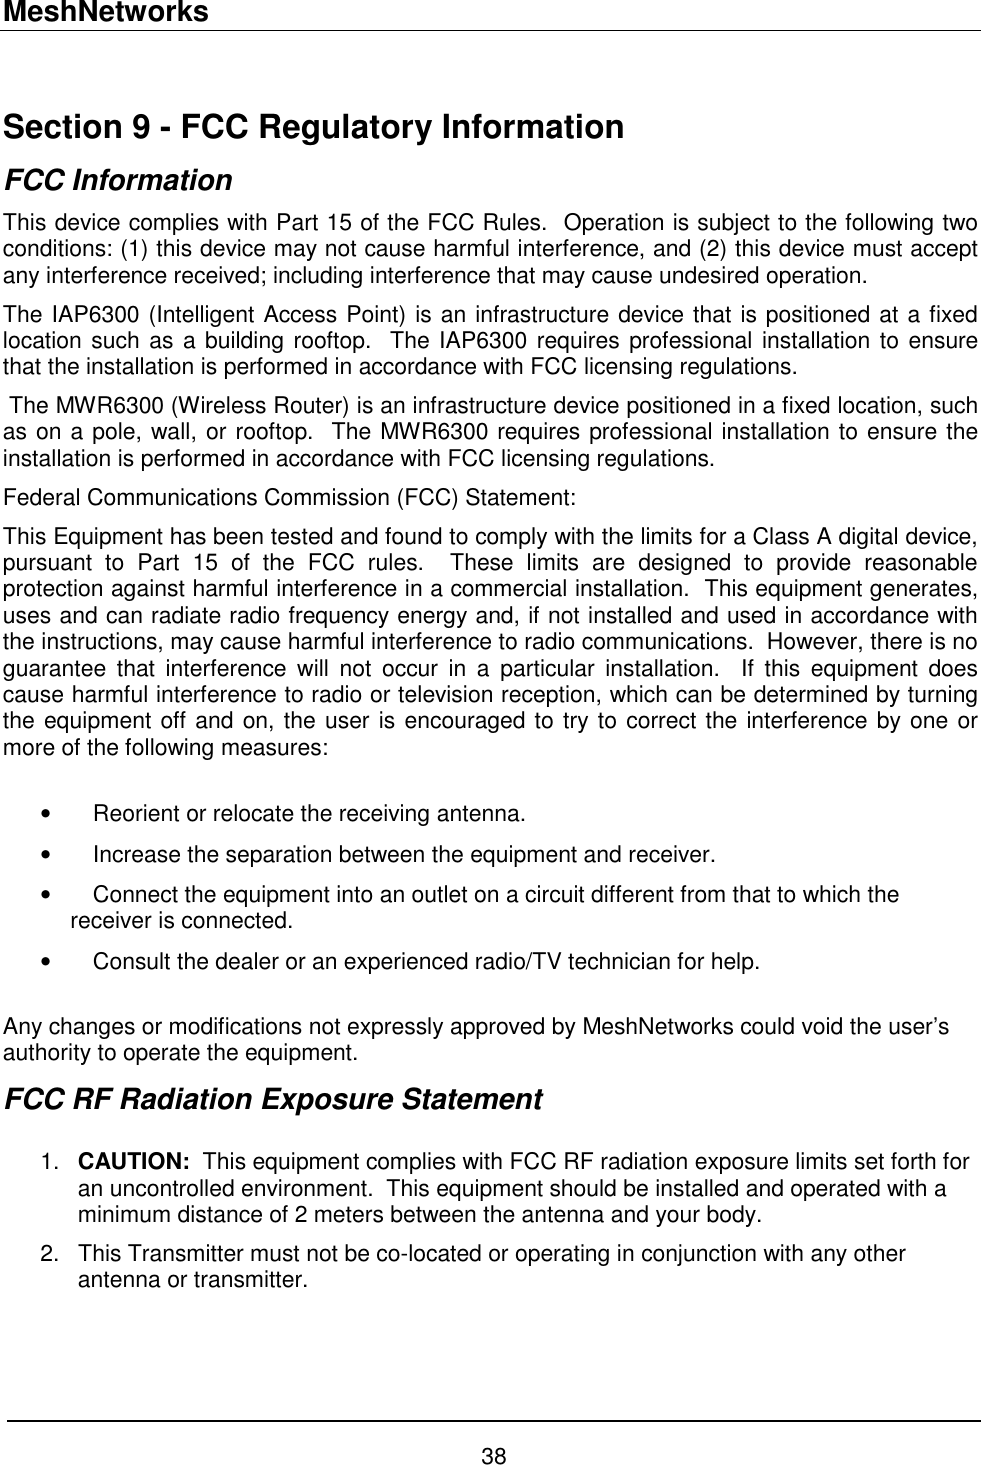 MeshNetworks 38  Section 9 - FCC Regulatory Information FCC Information This device complies with Part 15 of the FCC Rules.  Operation is subject to the following two conditions: (1) this device may not cause harmful interference, and (2) this device must accept any interference received; including interference that may cause undesired operation. The IAP6300 (Intelligent Access Point) is an infrastructure device that is positioned at a fixed location such as a building rooftop.  The IAP6300 requires professional installation to ensure that the installation is performed in accordance with FCC licensing regulations.    The MWR6300 (Wireless Router) is an infrastructure device positioned in a fixed location, such as on a pole, wall, or rooftop.  The MWR6300 requires professional installation to ensure the installation is performed in accordance with FCC licensing regulations.   Federal Communications Commission (FCC) Statement: This Equipment has been tested and found to comply with the limits for a Class A digital device, pursuant to Part 15 of the FCC rules.  These limits are designed to provide reasonable protection against harmful interference in a commercial installation.  This equipment generates, uses and can radiate radio frequency energy and, if not installed and used in accordance with the instructions, may cause harmful interference to radio communications.  However, there is no guarantee that interference will not occur in a particular installation.  If this equipment does cause harmful interference to radio or television reception, which can be determined by turning the equipment off and on, the user is encouraged to try to correct the interference by one or more of the following measures:  •  Reorient or relocate the receiving antenna. •  Increase the separation between the equipment and receiver. •  Connect the equipment into an outlet on a circuit different from that to which the receiver is connected.  •  Consult the dealer or an experienced radio/TV technician for help.  Any changes or modifications not expressly approved by MeshNetworks could void the user’s authority to operate the equipment. FCC RF Radiation Exposure Statement  1.  CAUTION:  This equipment complies with FCC RF radiation exposure limits set forth for an uncontrolled environment.  This equipment should be installed and operated with a minimum distance of 2 meters between the antenna and your body. 2.  This Transmitter must not be co-located or operating in conjunction with any other antenna or transmitter.    